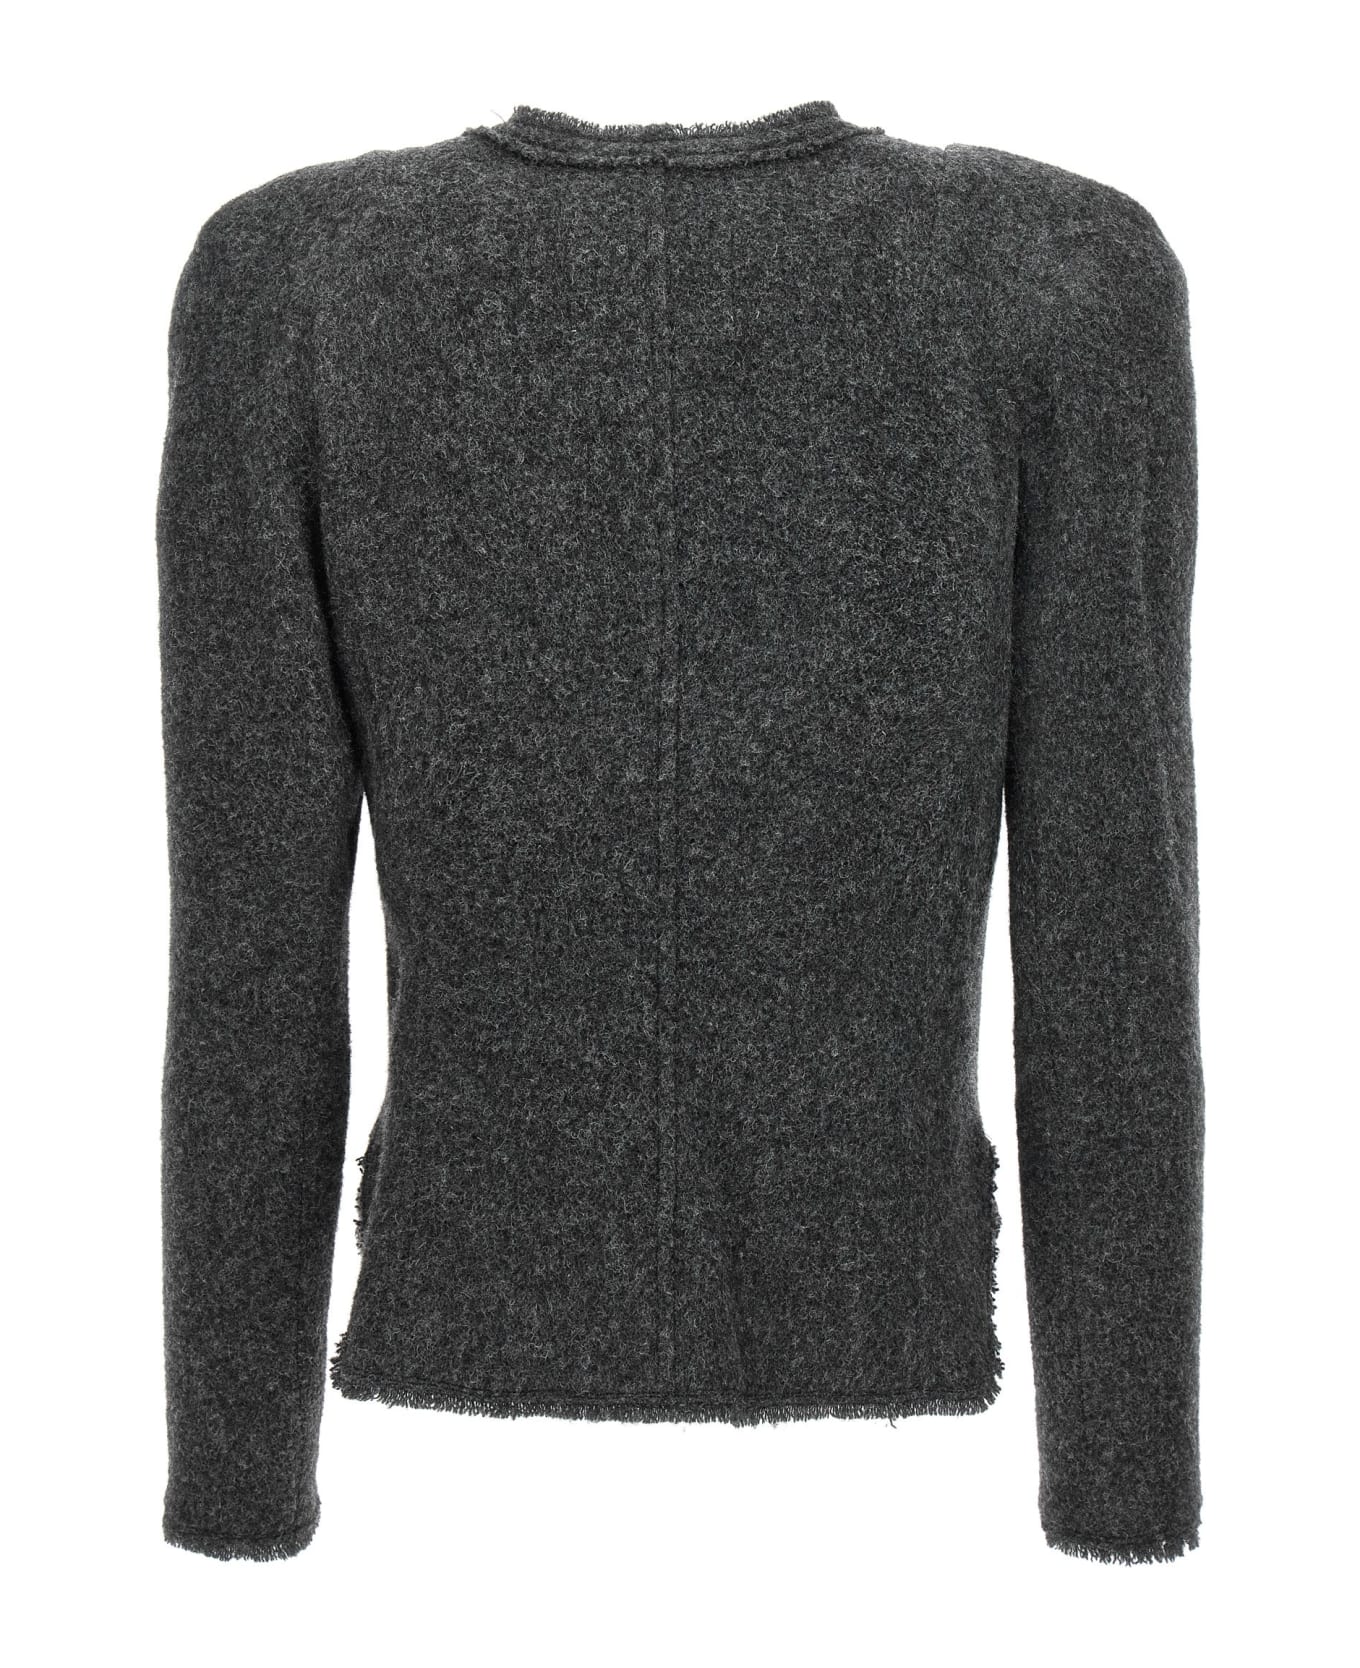 Marant Étoile Buttoned Knitted Cardigan - Gray